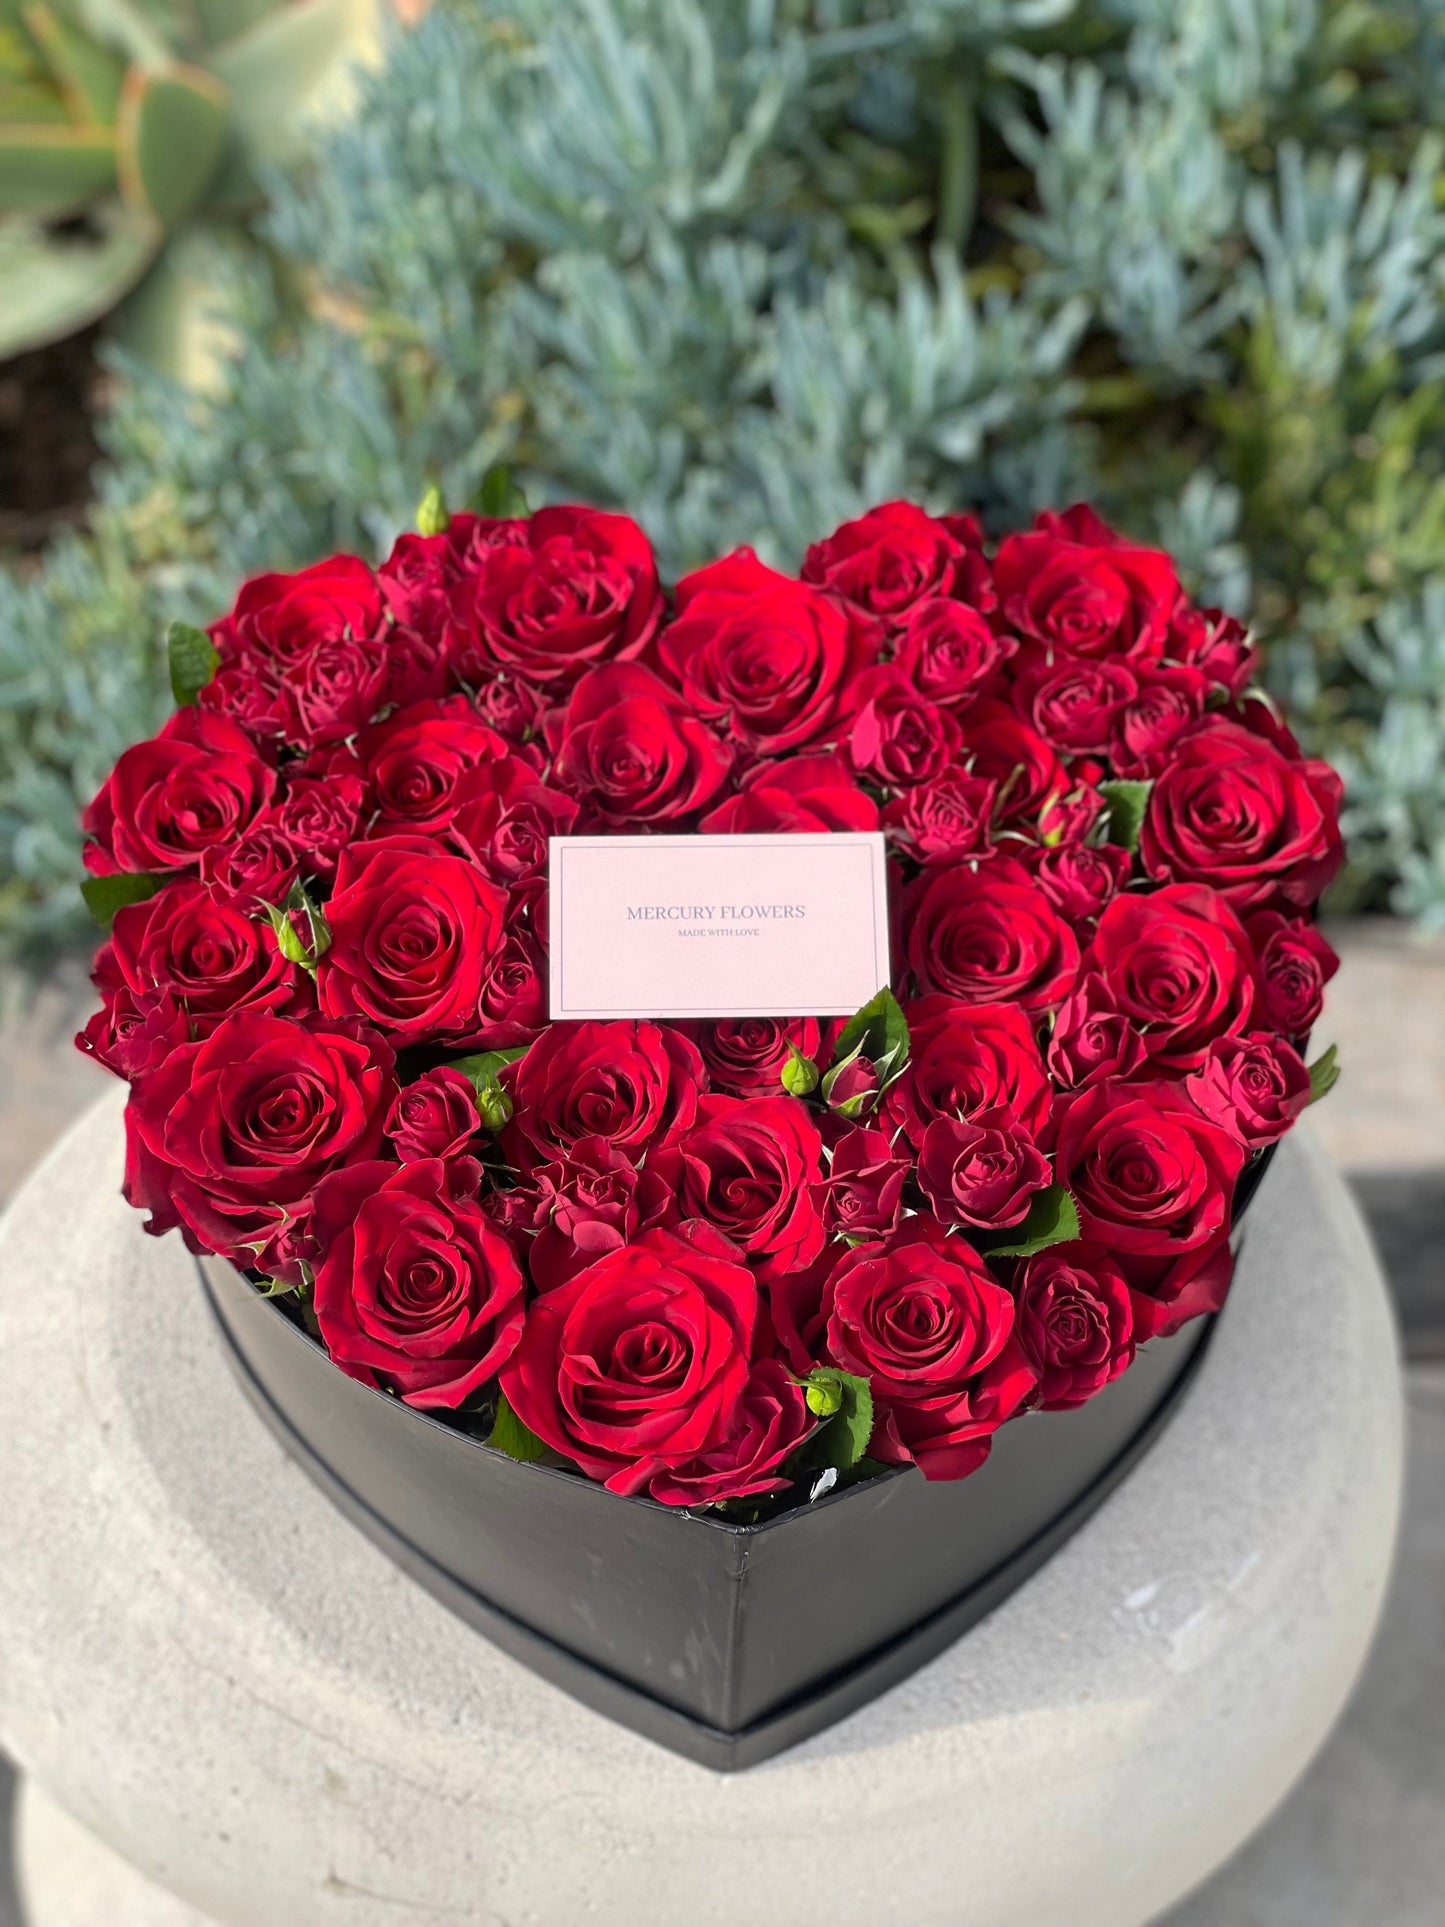 Heart box with red roses